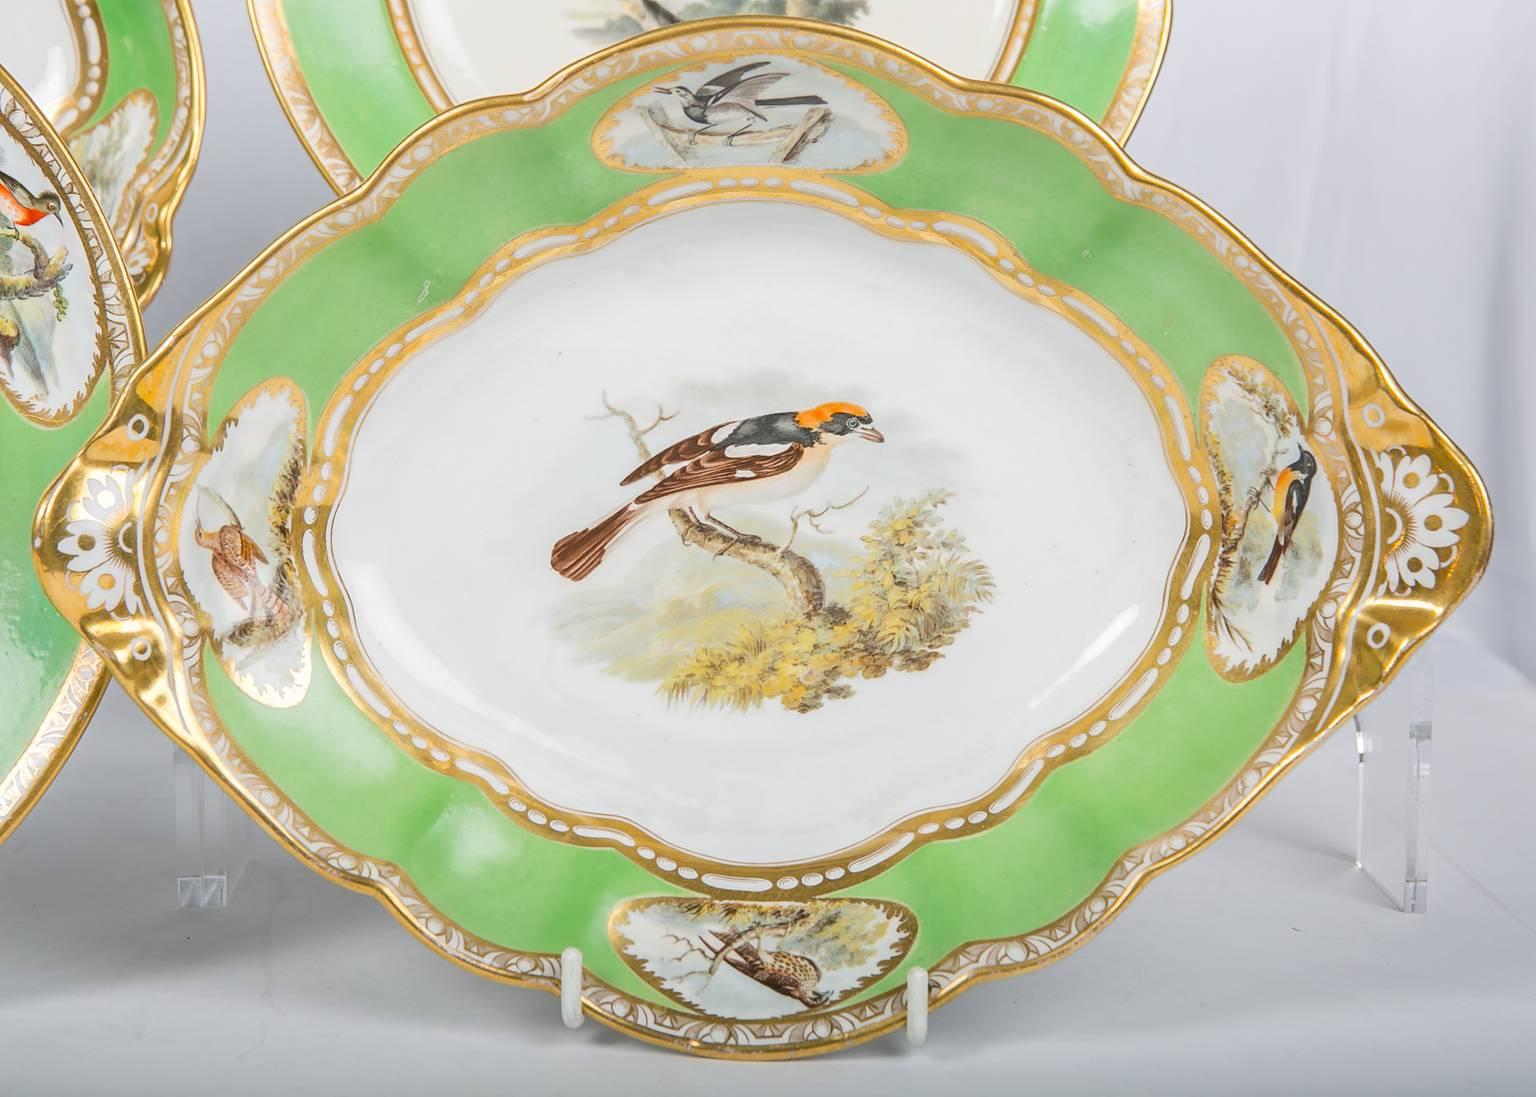 A set of Spode dishes with hand-painted birds and apple green borders. What makes these dishes so special is the beauty and artistry of the hand-painted birds, and
the English apple green borders which enhance the painting of the birds.
Shown in